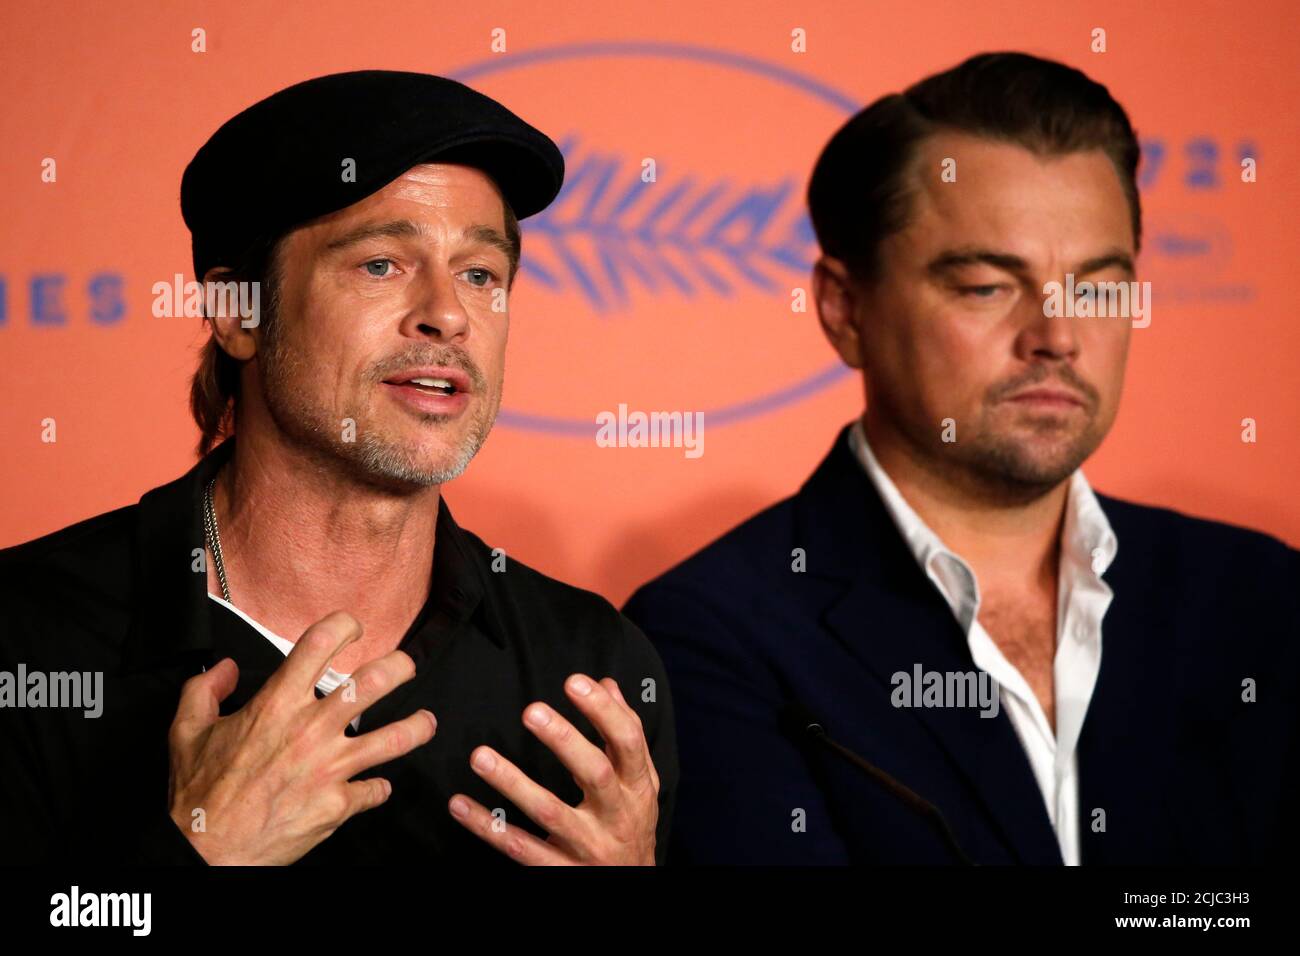 72nd Cannes Film Festival News Conference For The Film Once Upon A Time In Hollywood In Competition Cannes France May 22 19 Cast Members Brad Pitt And Leonardo Dicaprio Attend